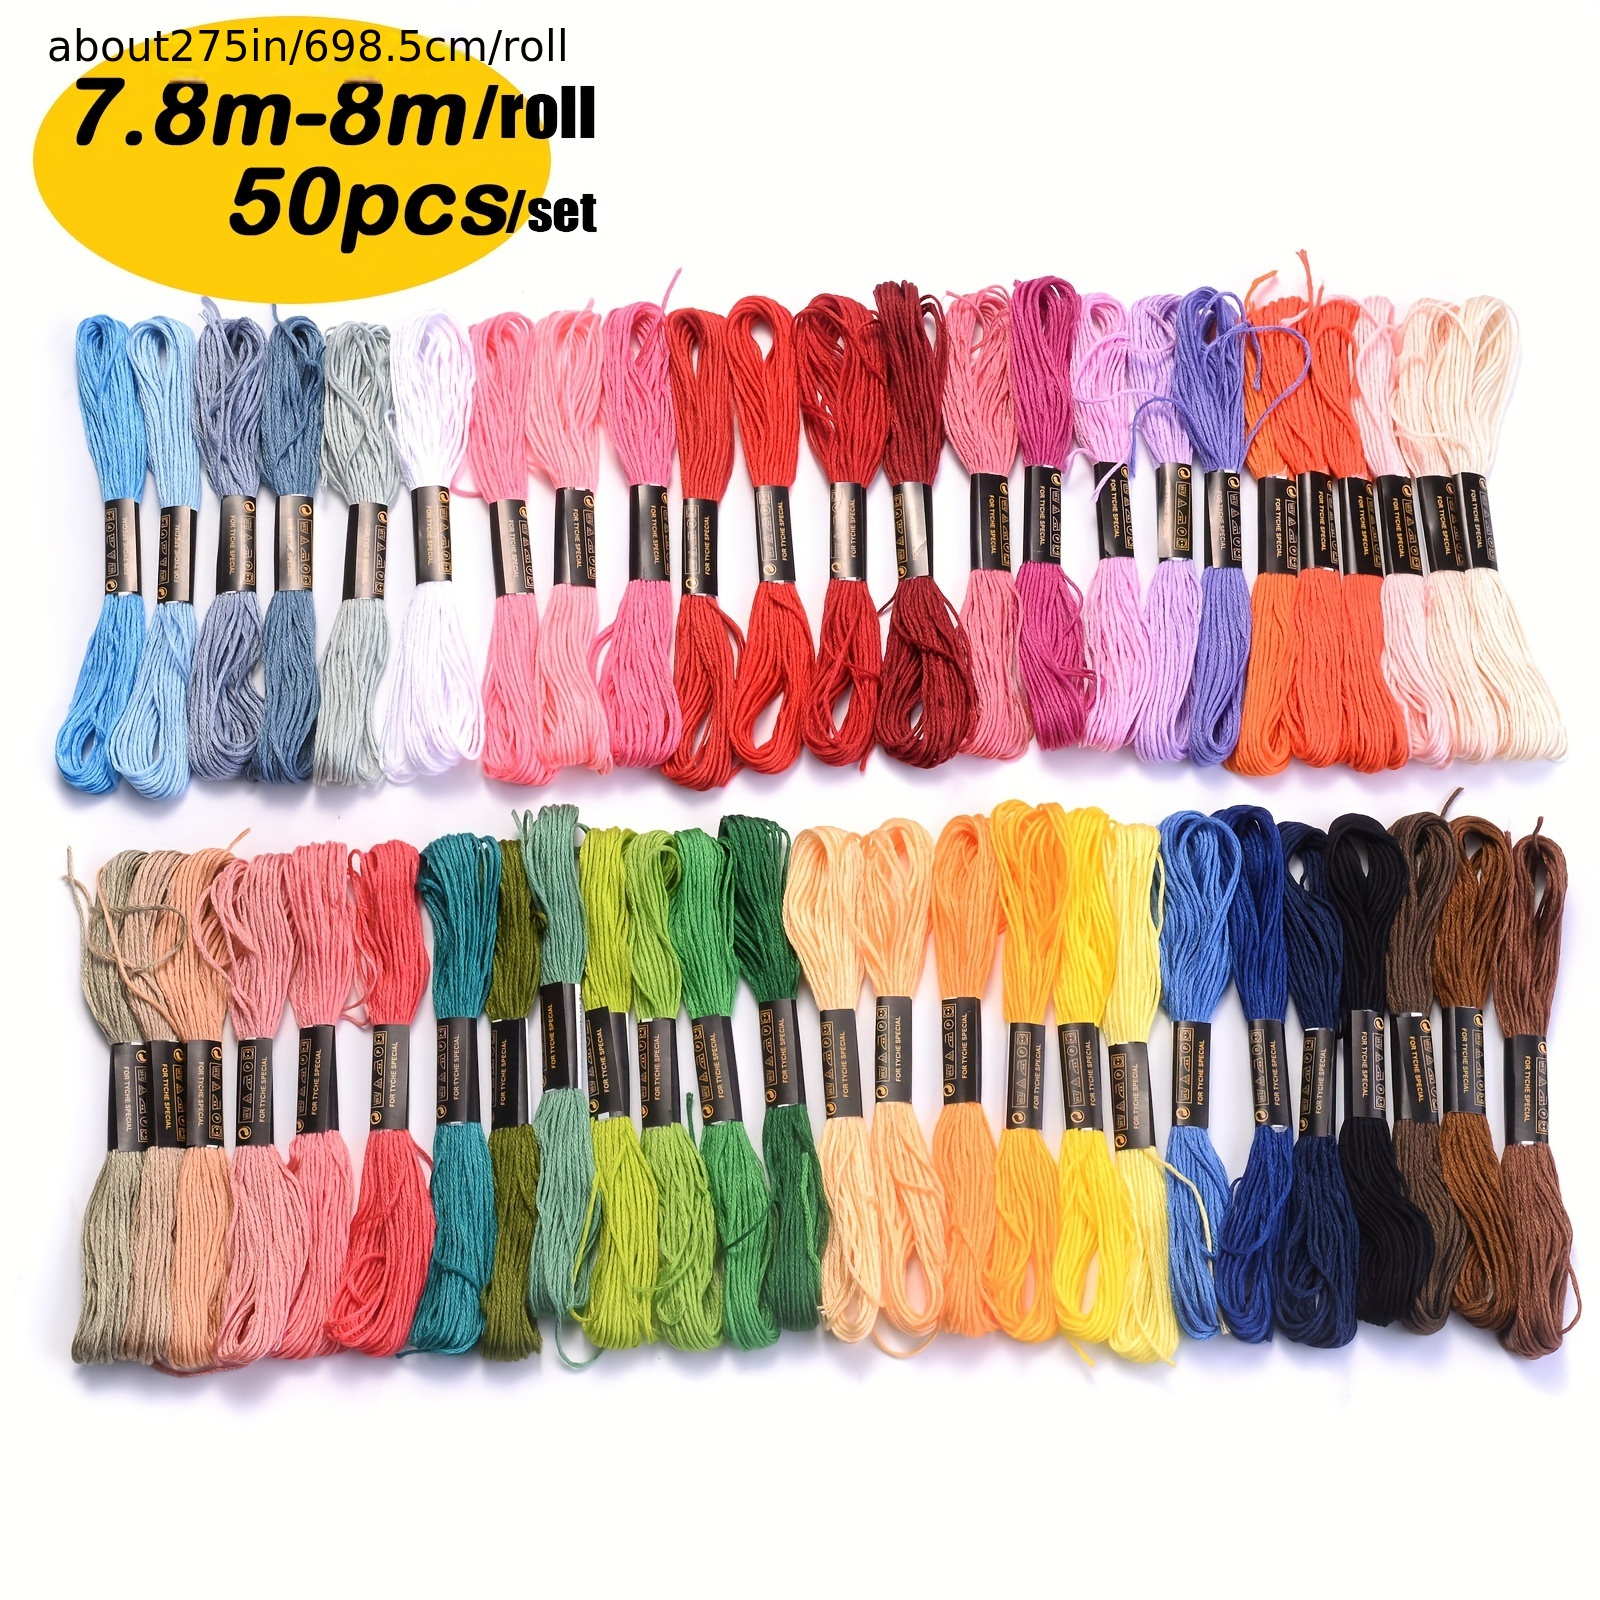 Friendship Bracelet String 50 Skeins Rainbow Color Embroidery Floss Cross  Stitch Embroidery Thread Cotton Floss Bracelet Yarn, Craft Floss